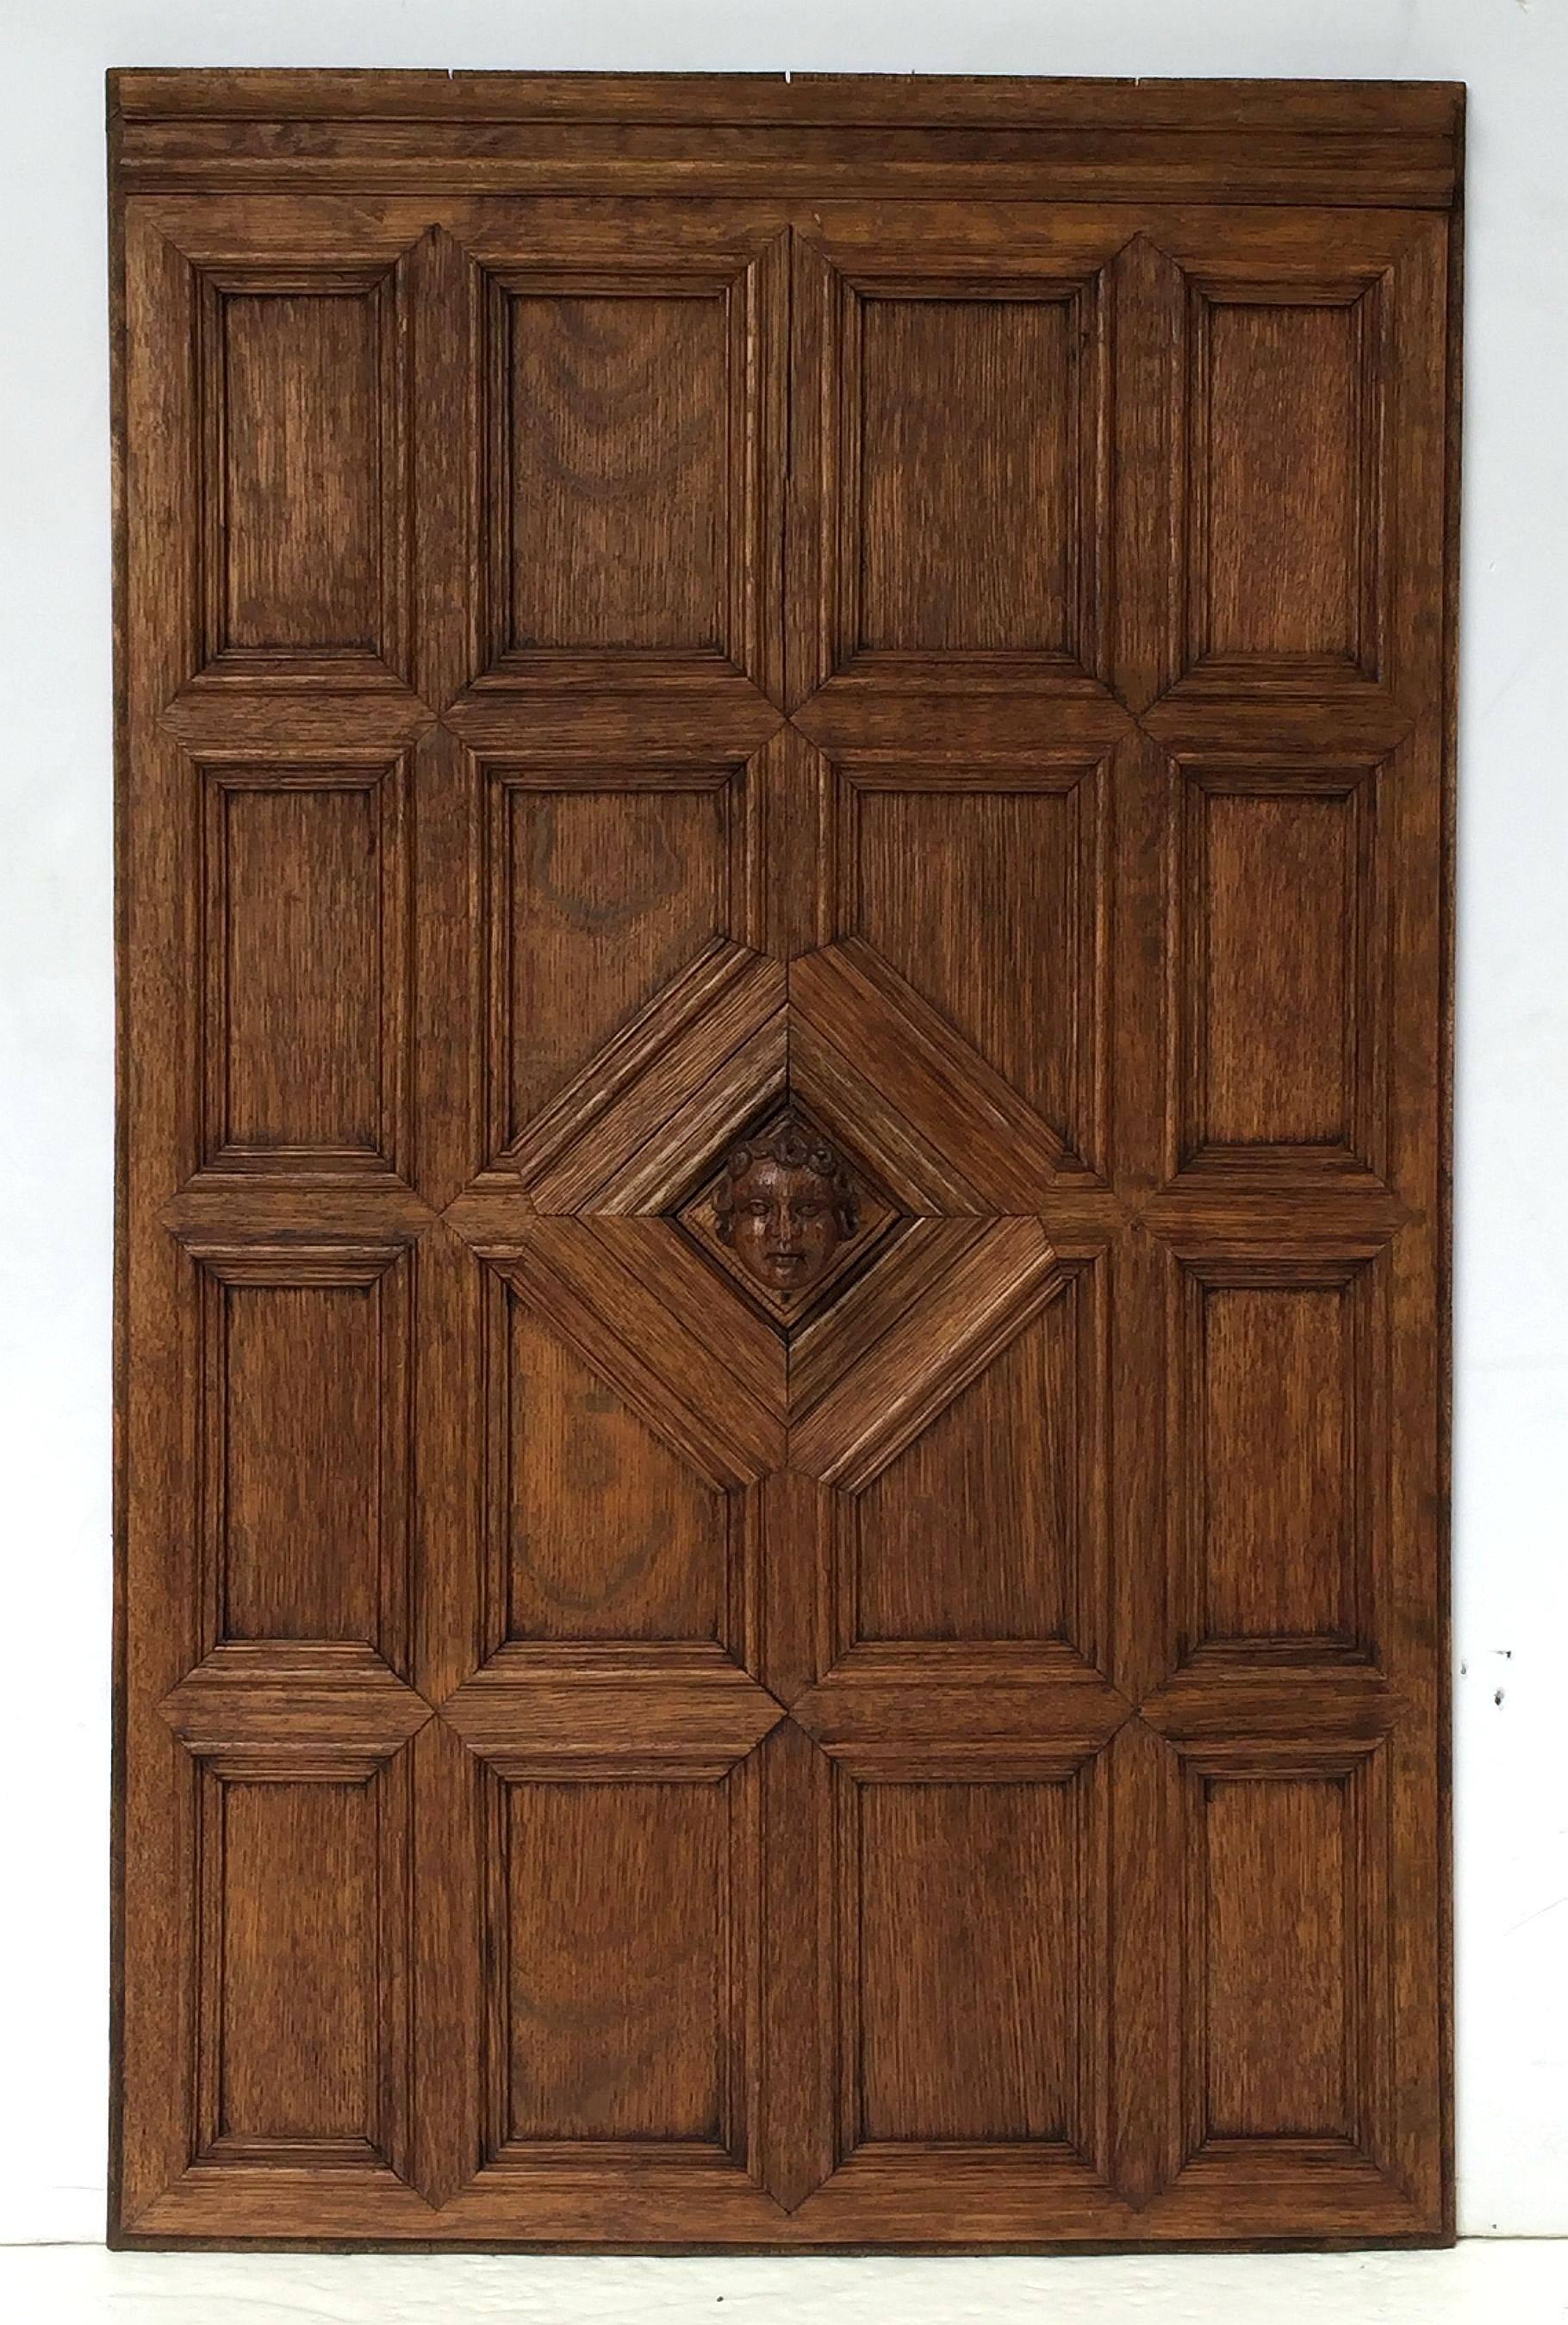 A rectangular French carved panel of oak, featuring a grid of twelve moulded panels around a center panel with relief carving of a cherub-like bust, possibly Bacchus or Dionysus - great for a wine room!
  